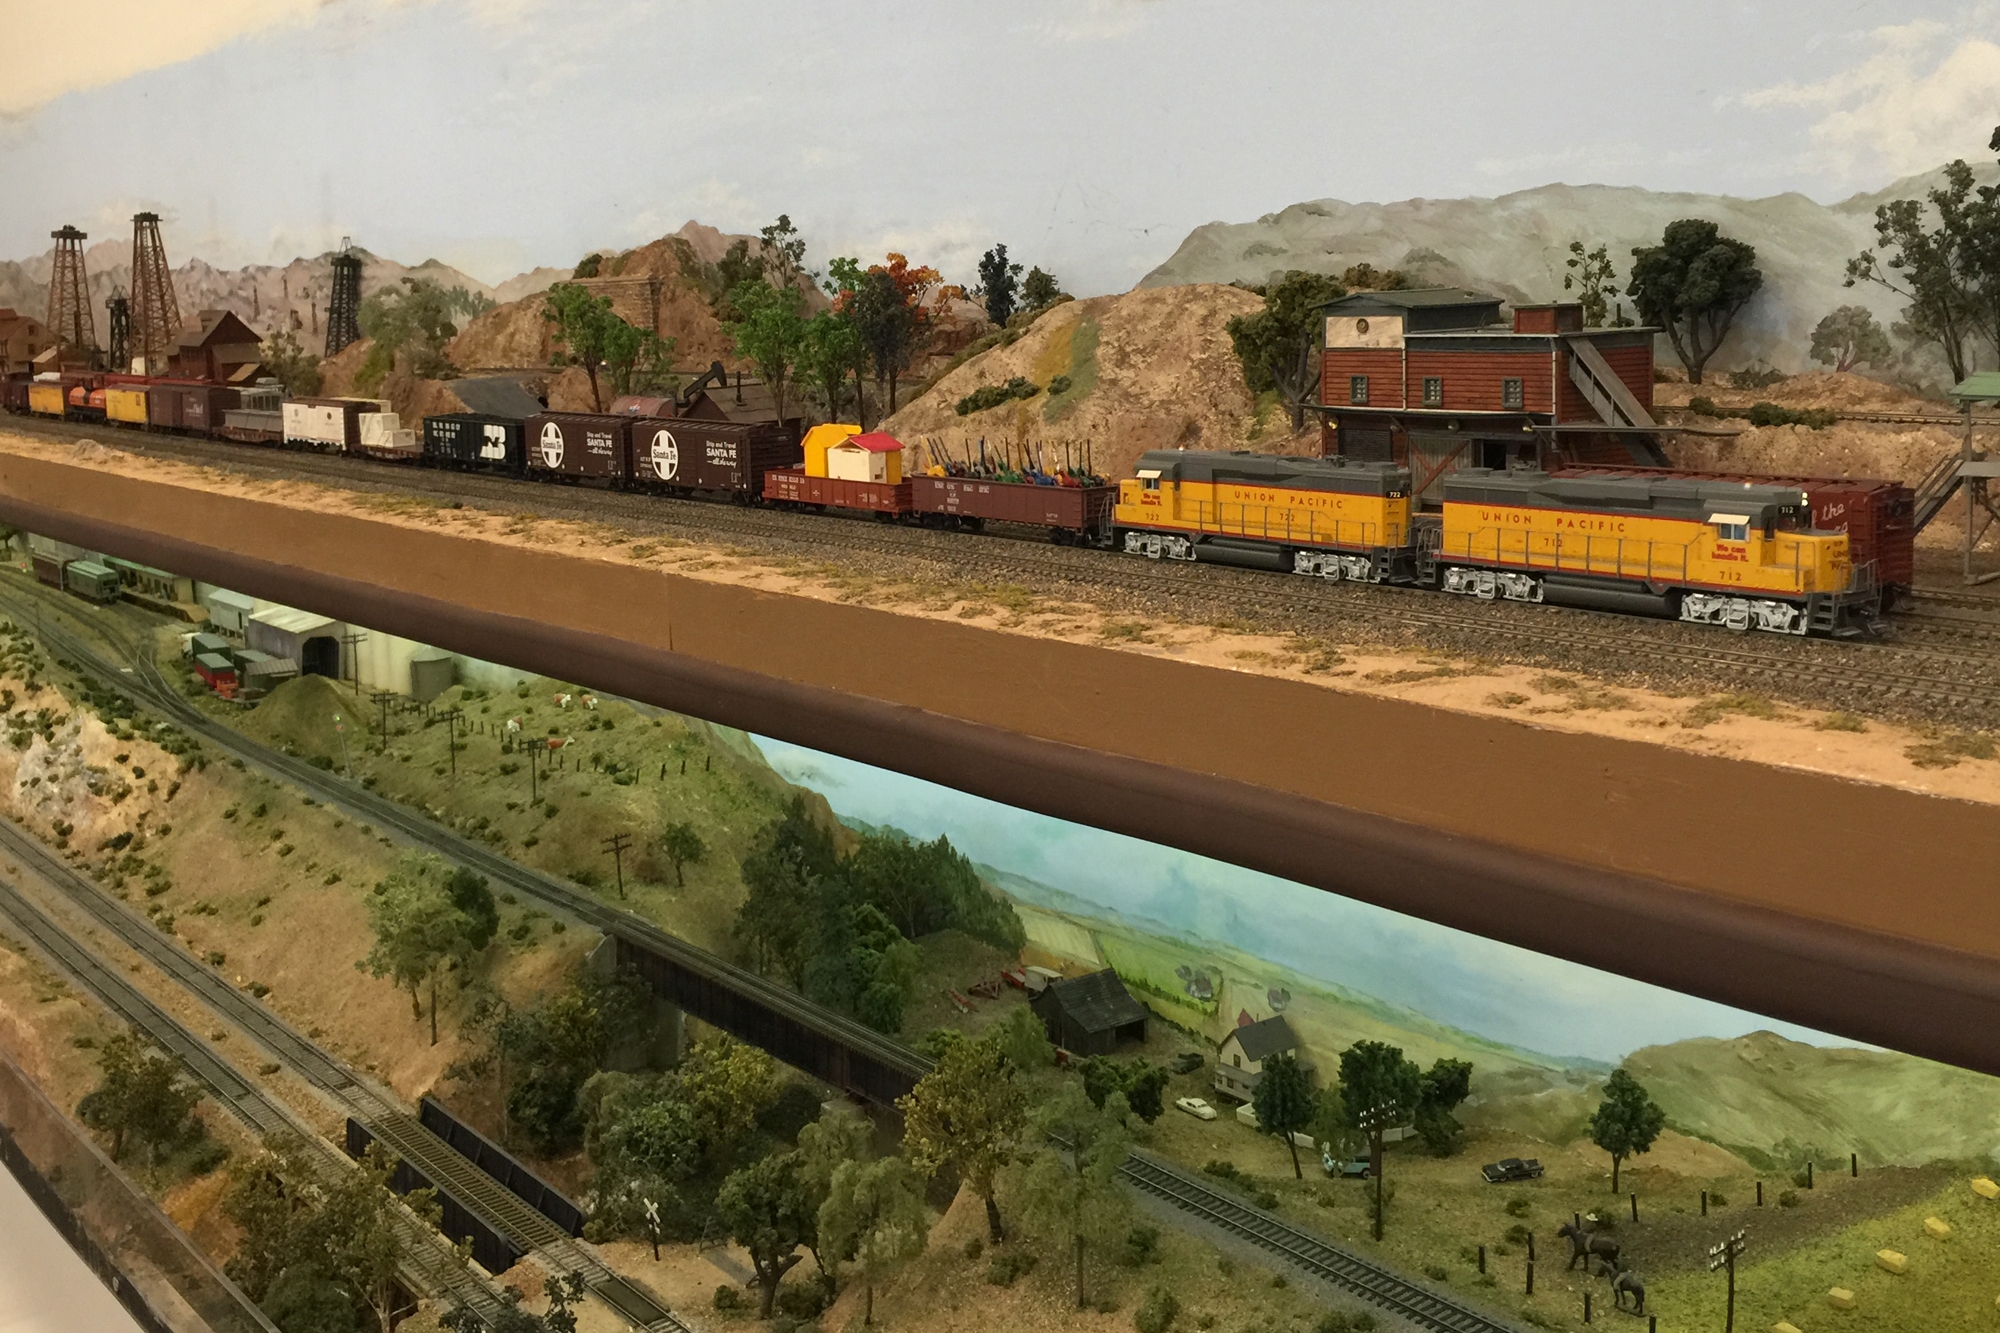 images/Links/NorthCountyModelRailroadSociety.jpg